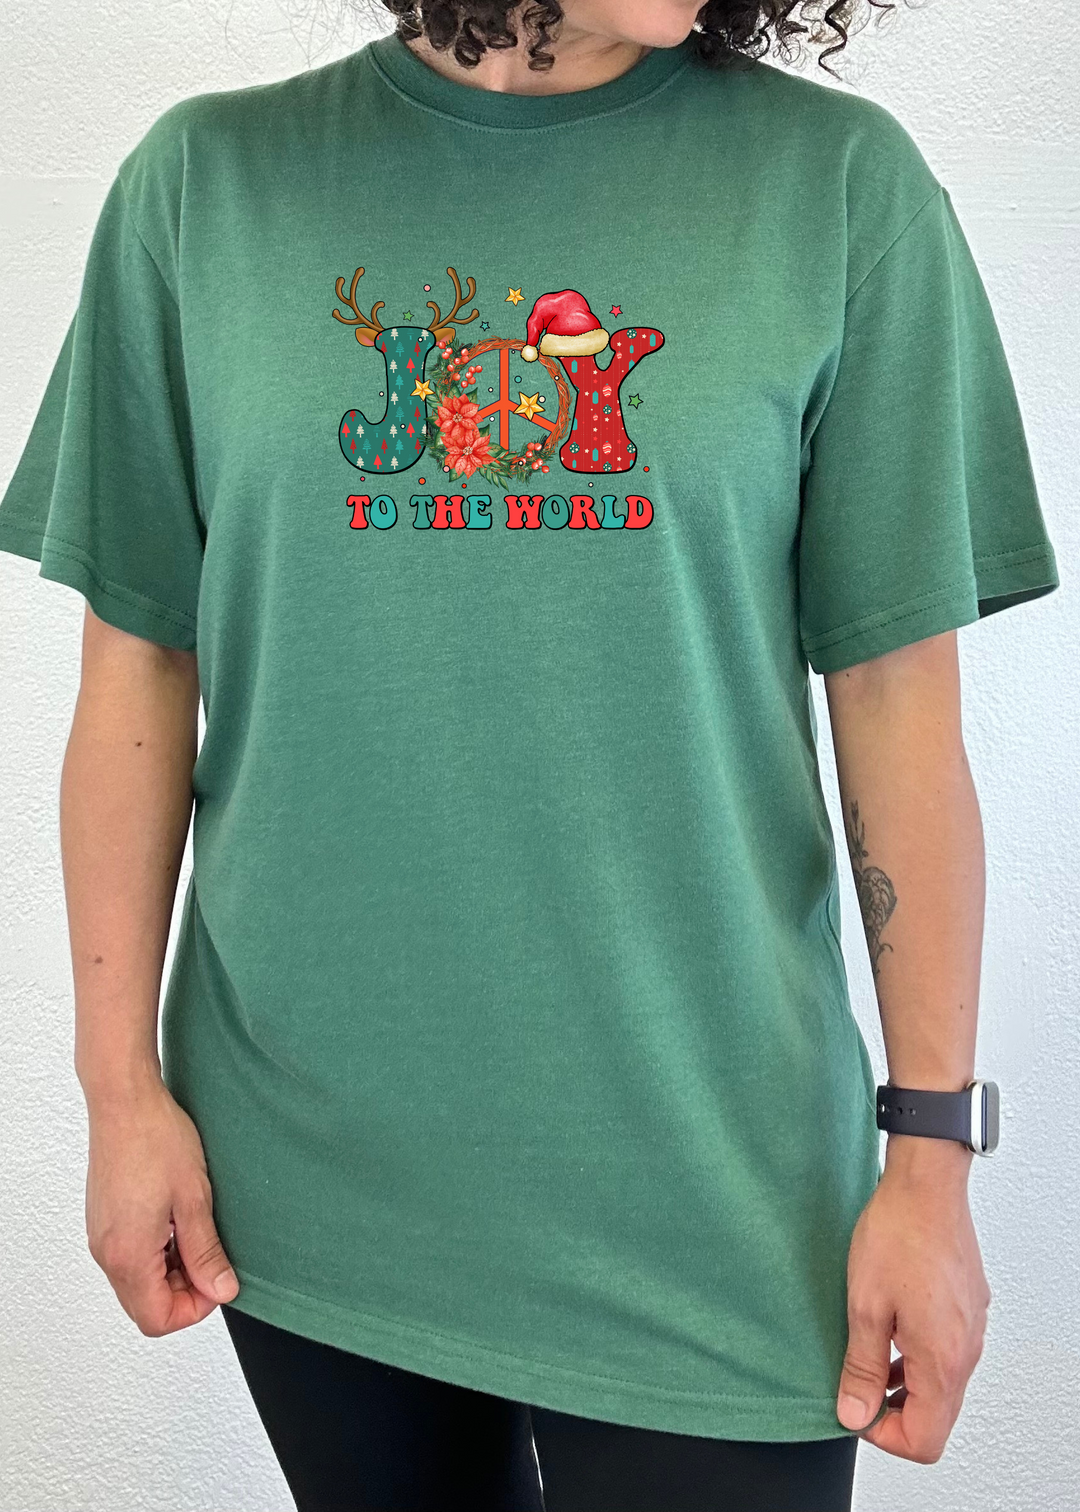 Joy To The World Christmas Unisex Graphic Bamboo T-Shirt teal